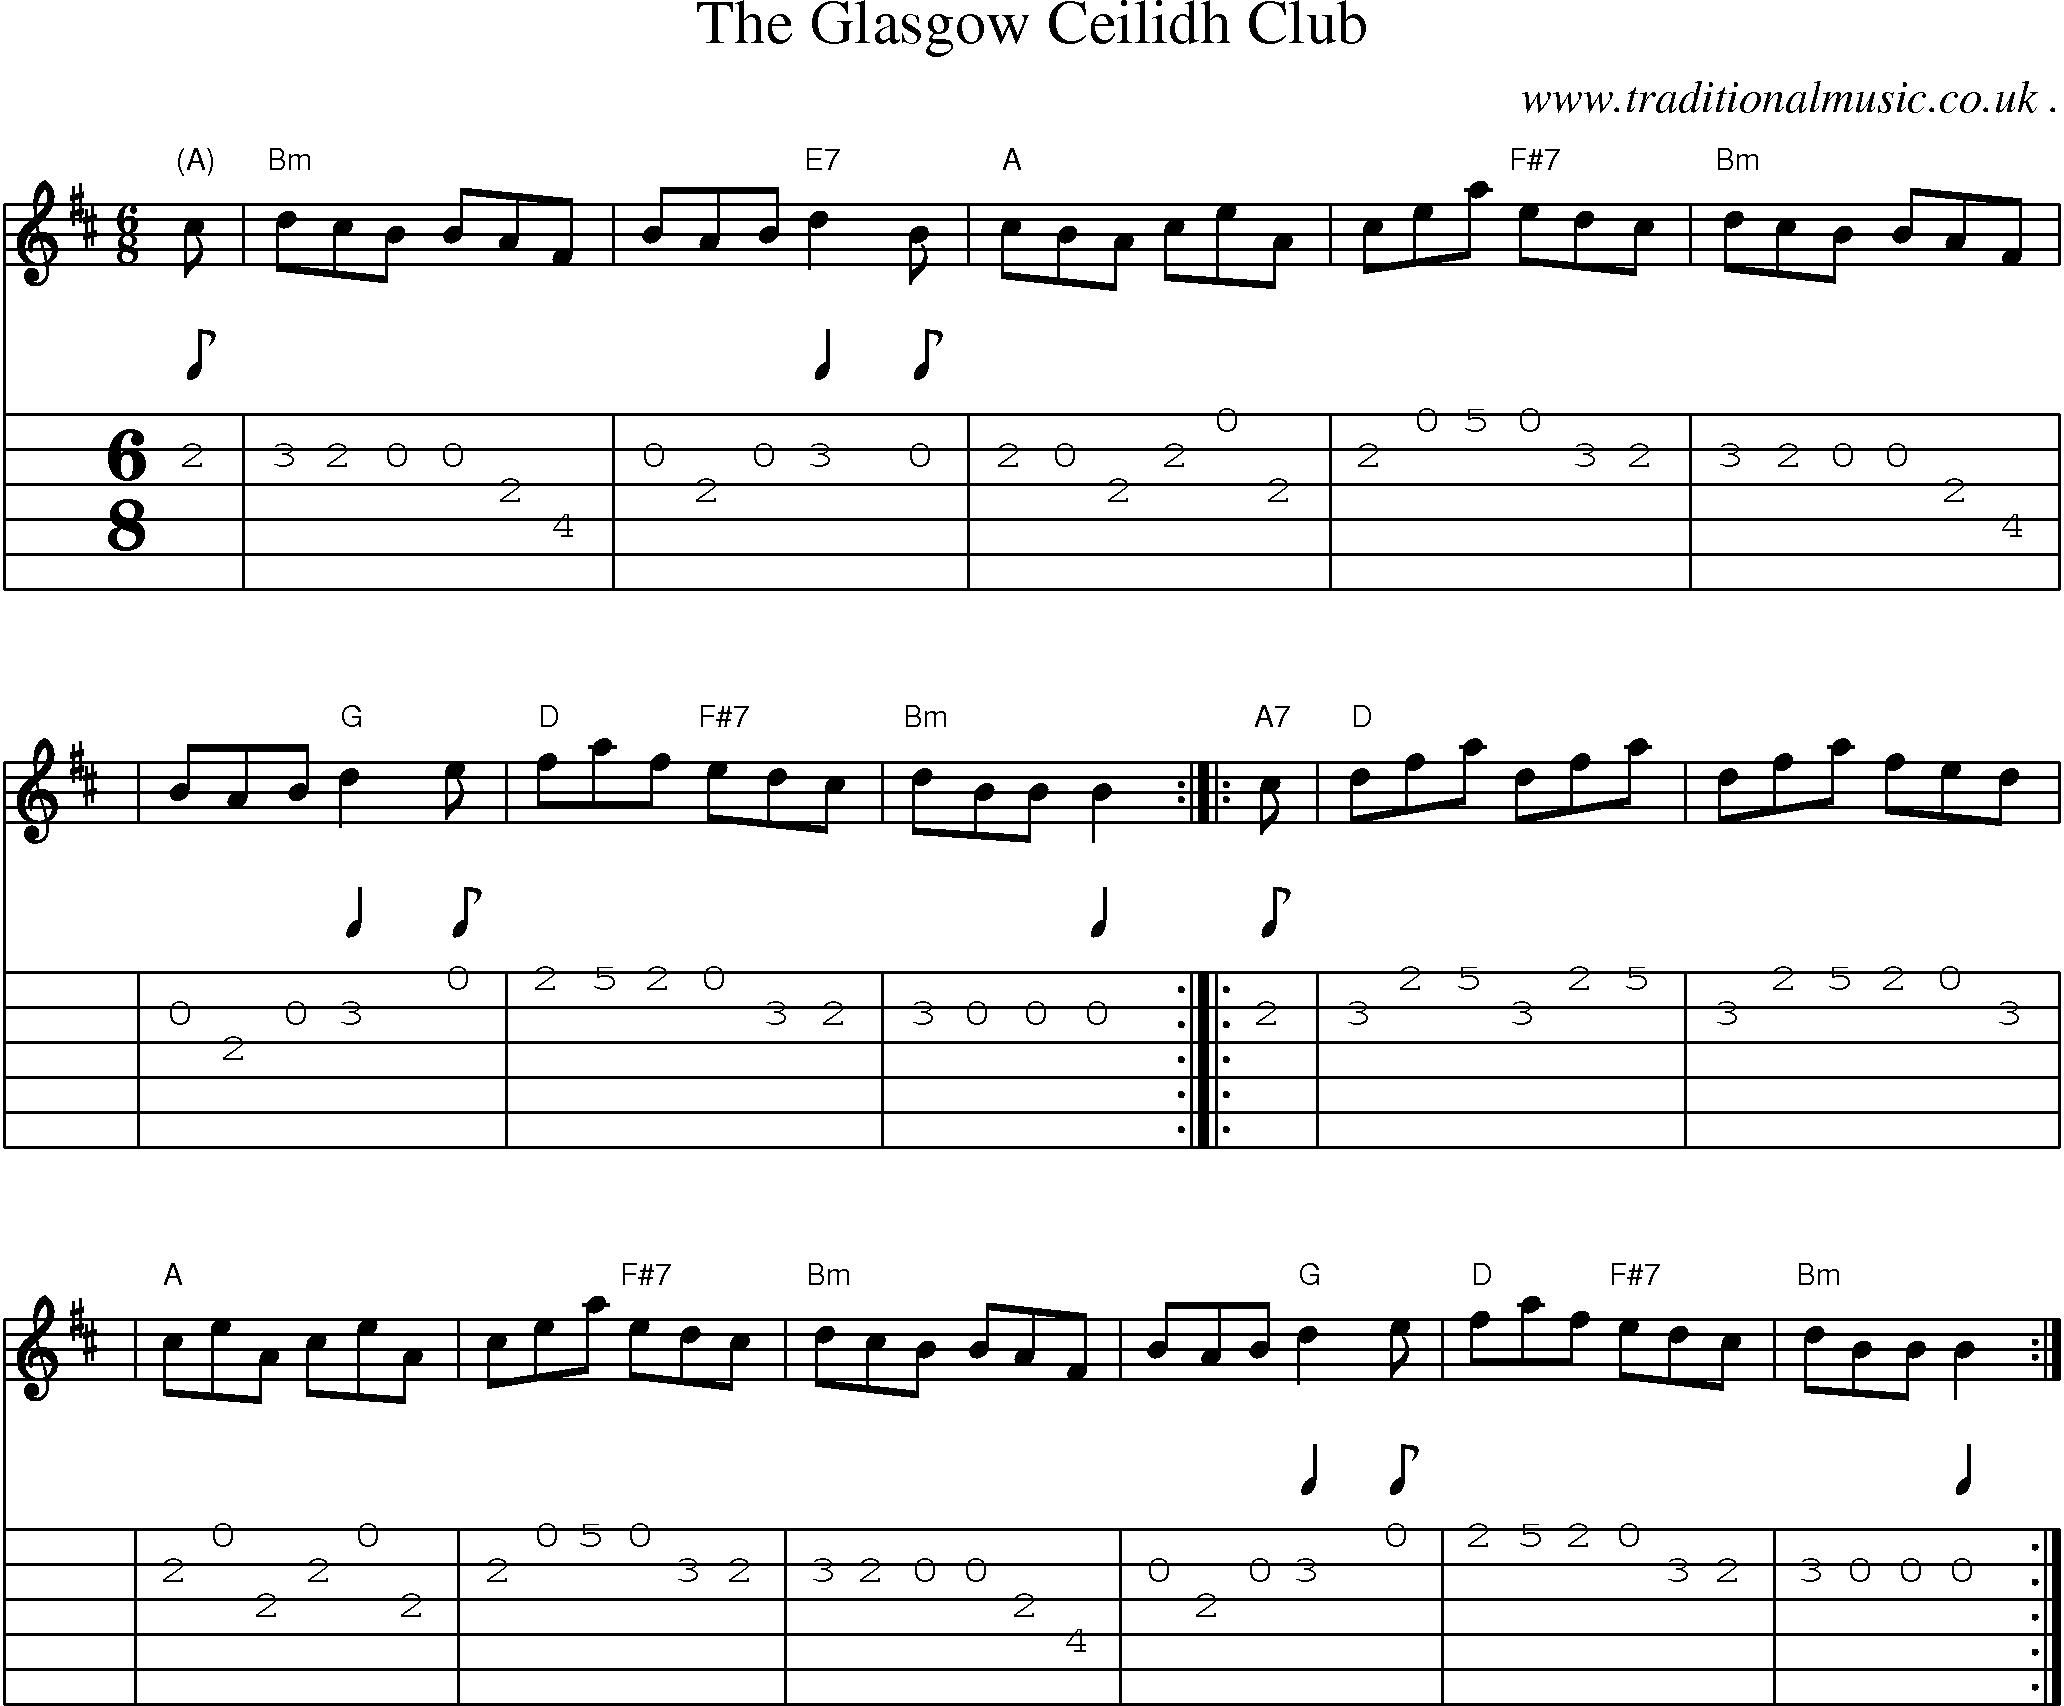 Sheet-music  score, Chords and Guitar Tabs for The Glasgow Ceilidh Club